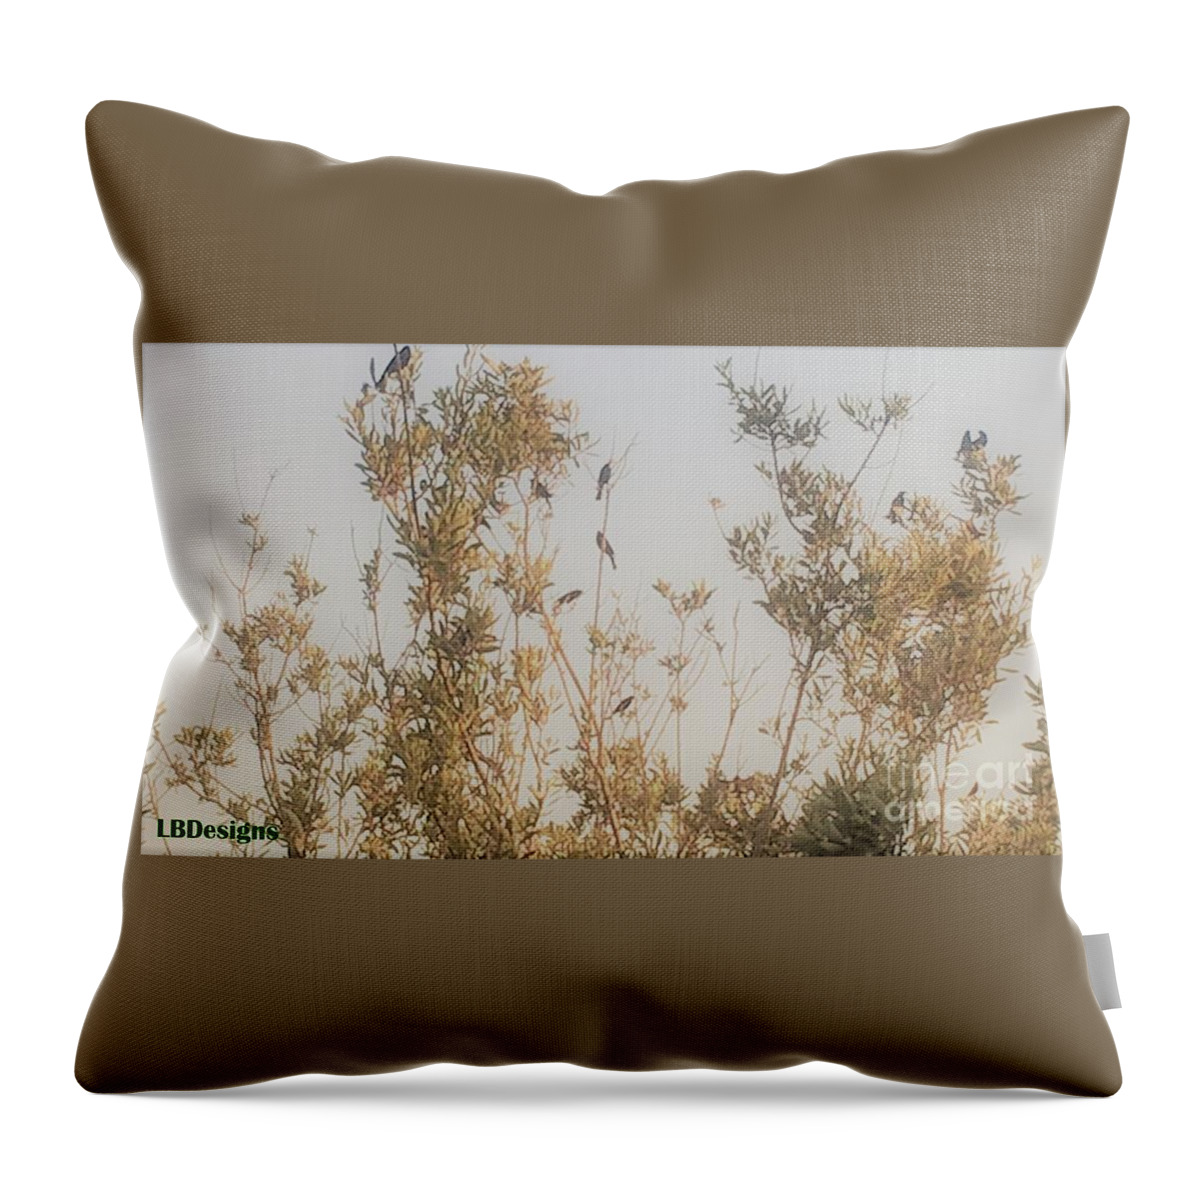 “arts And Design”; Gallery; Images; Ancient; Celebrate; Leaves; “pumpkins And Pottery”; “modern Minimalism”; “abstract And Still Life”; Autumn Throw Pillow featuring the photograph Autumn Chattering 2020 by LBDesigns